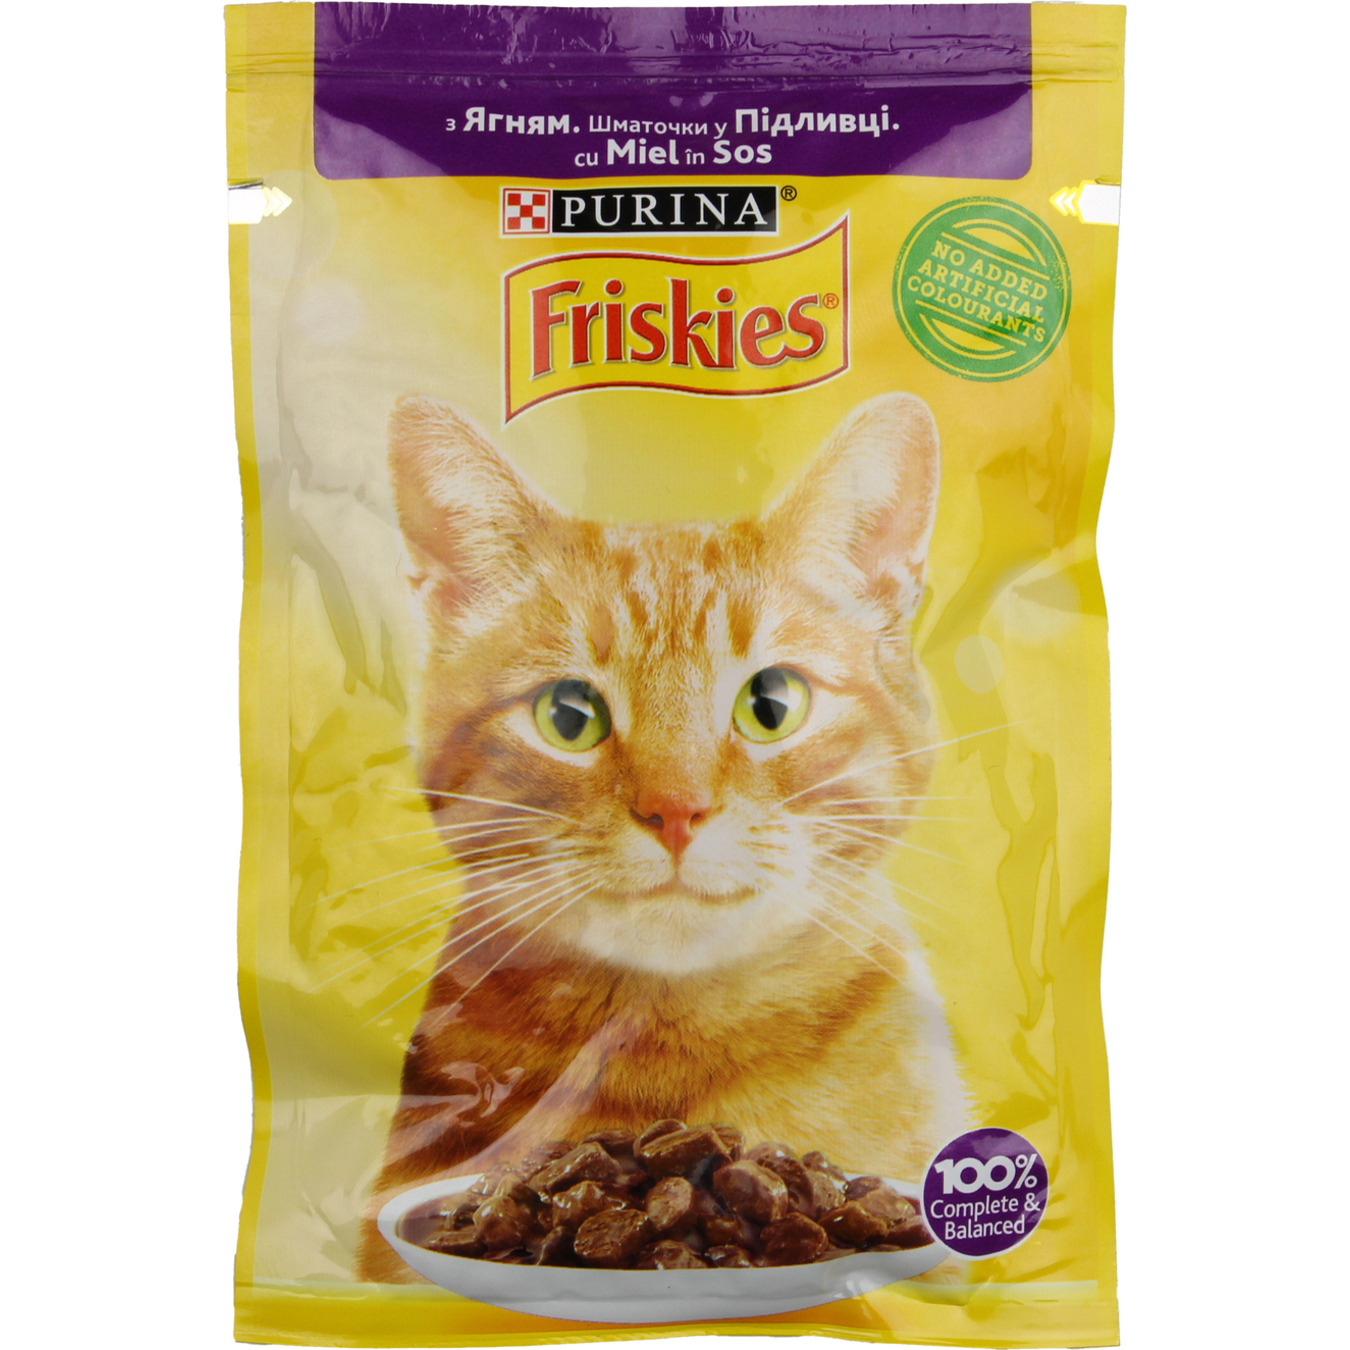 Purina Friskies Cats Food with Lamb Pieces in Sauce 85g 
